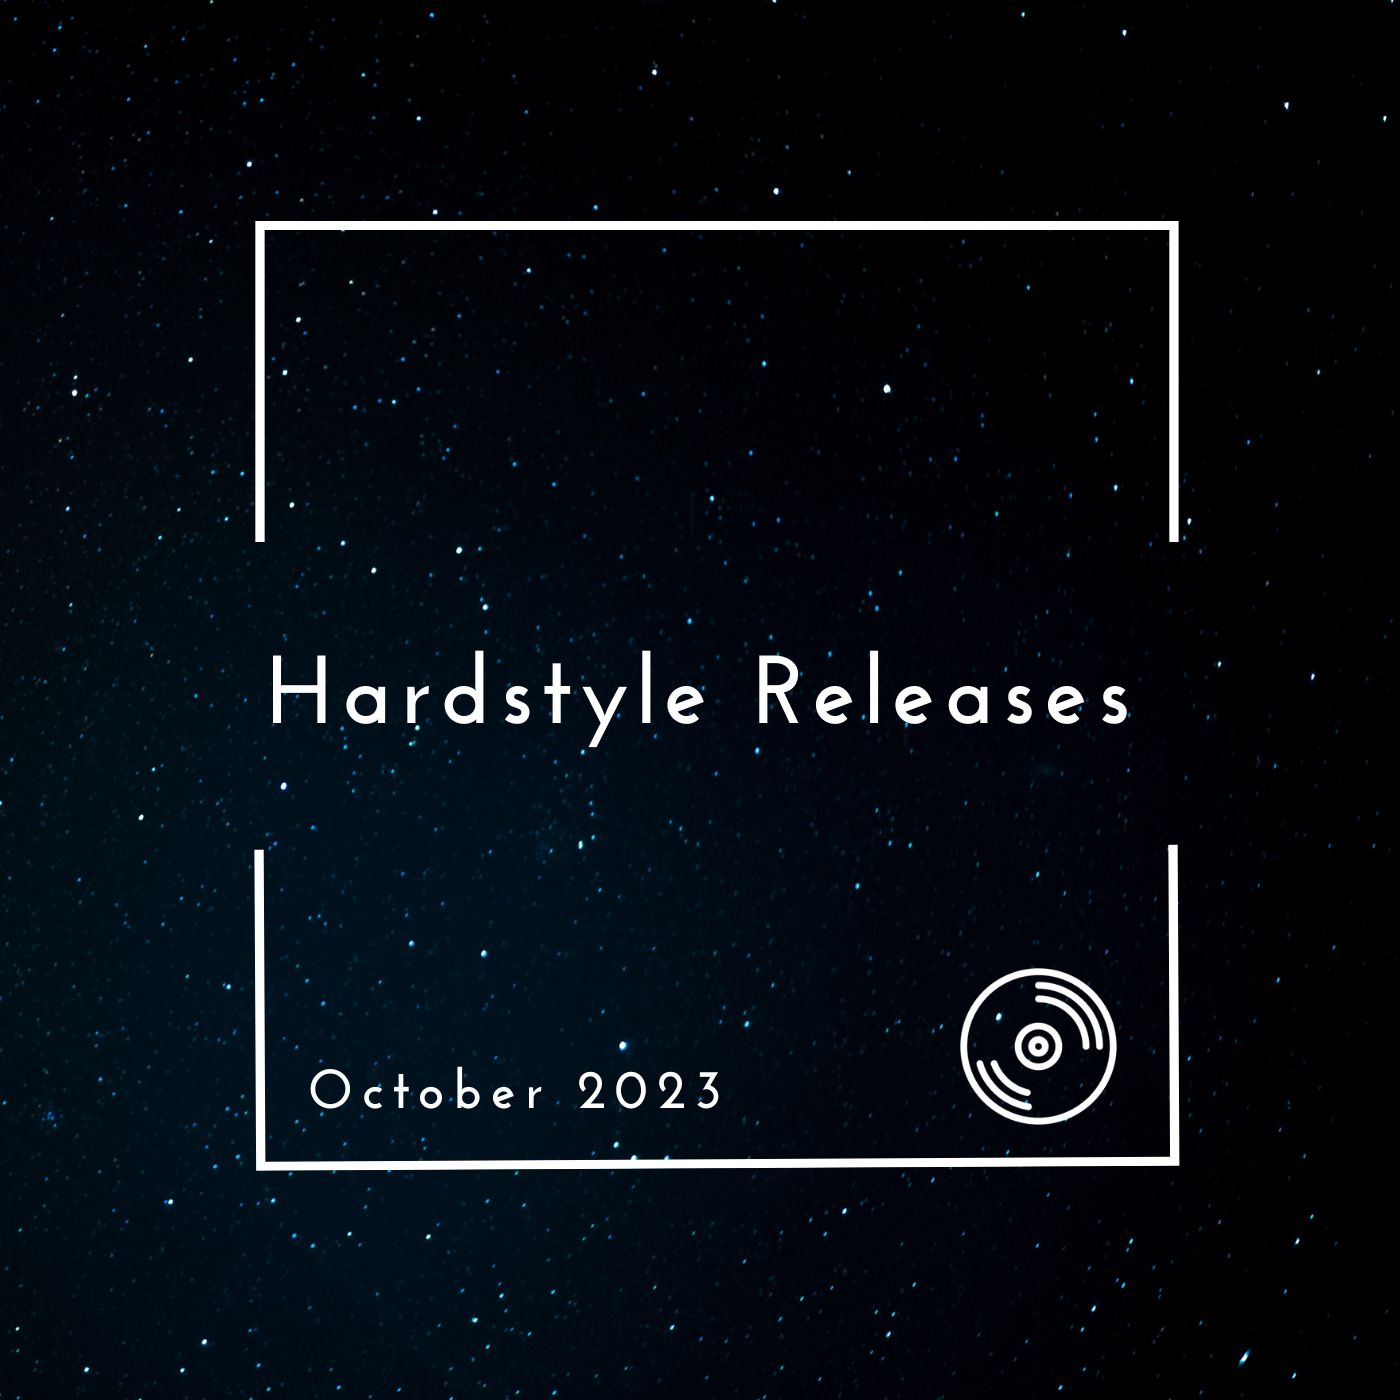 Hardstyle Releases October 2023